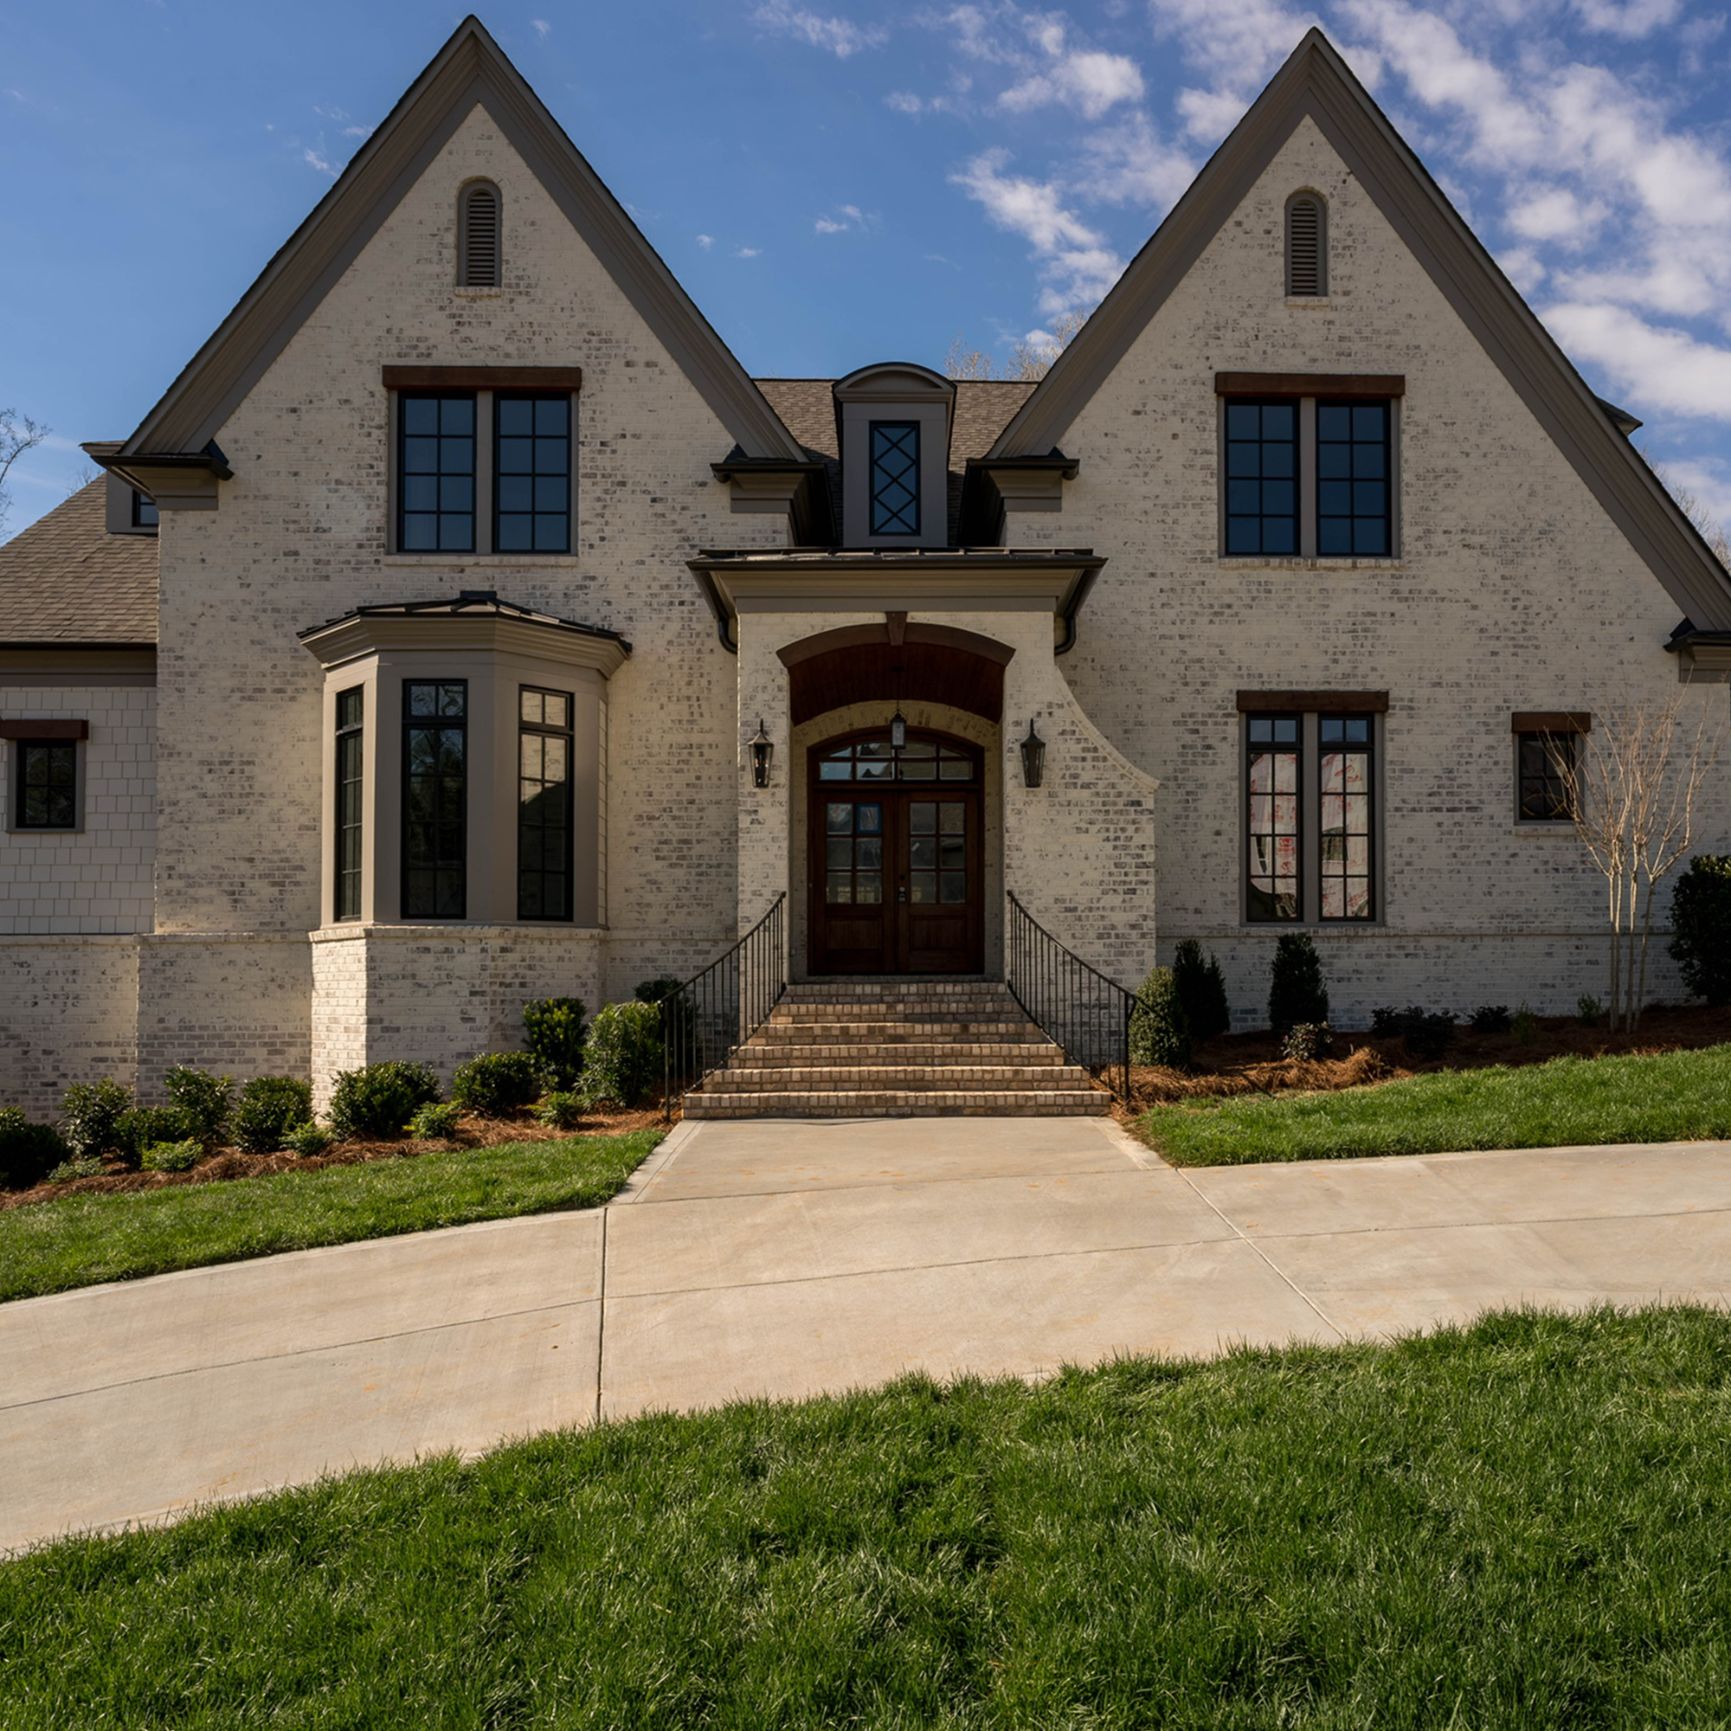 Riposo Beige brick home with dark wood accents